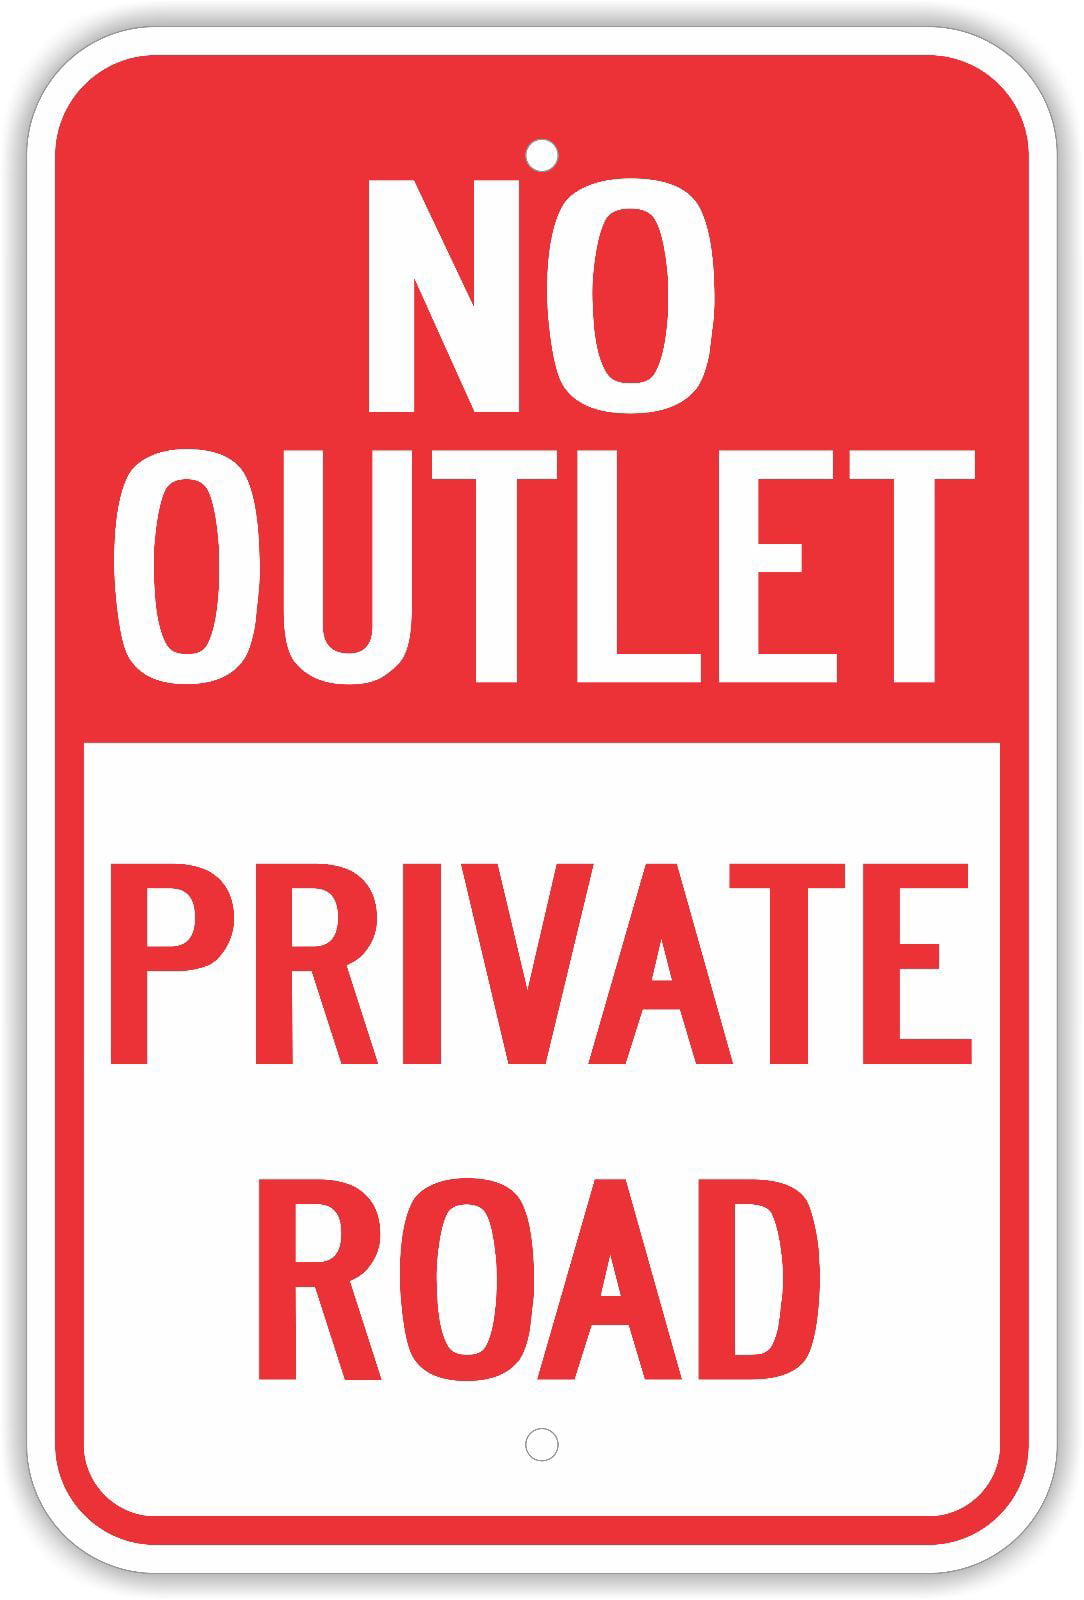 DEAD END PRIVATE ROAD 12"x18" ROAD STREET SIGN 